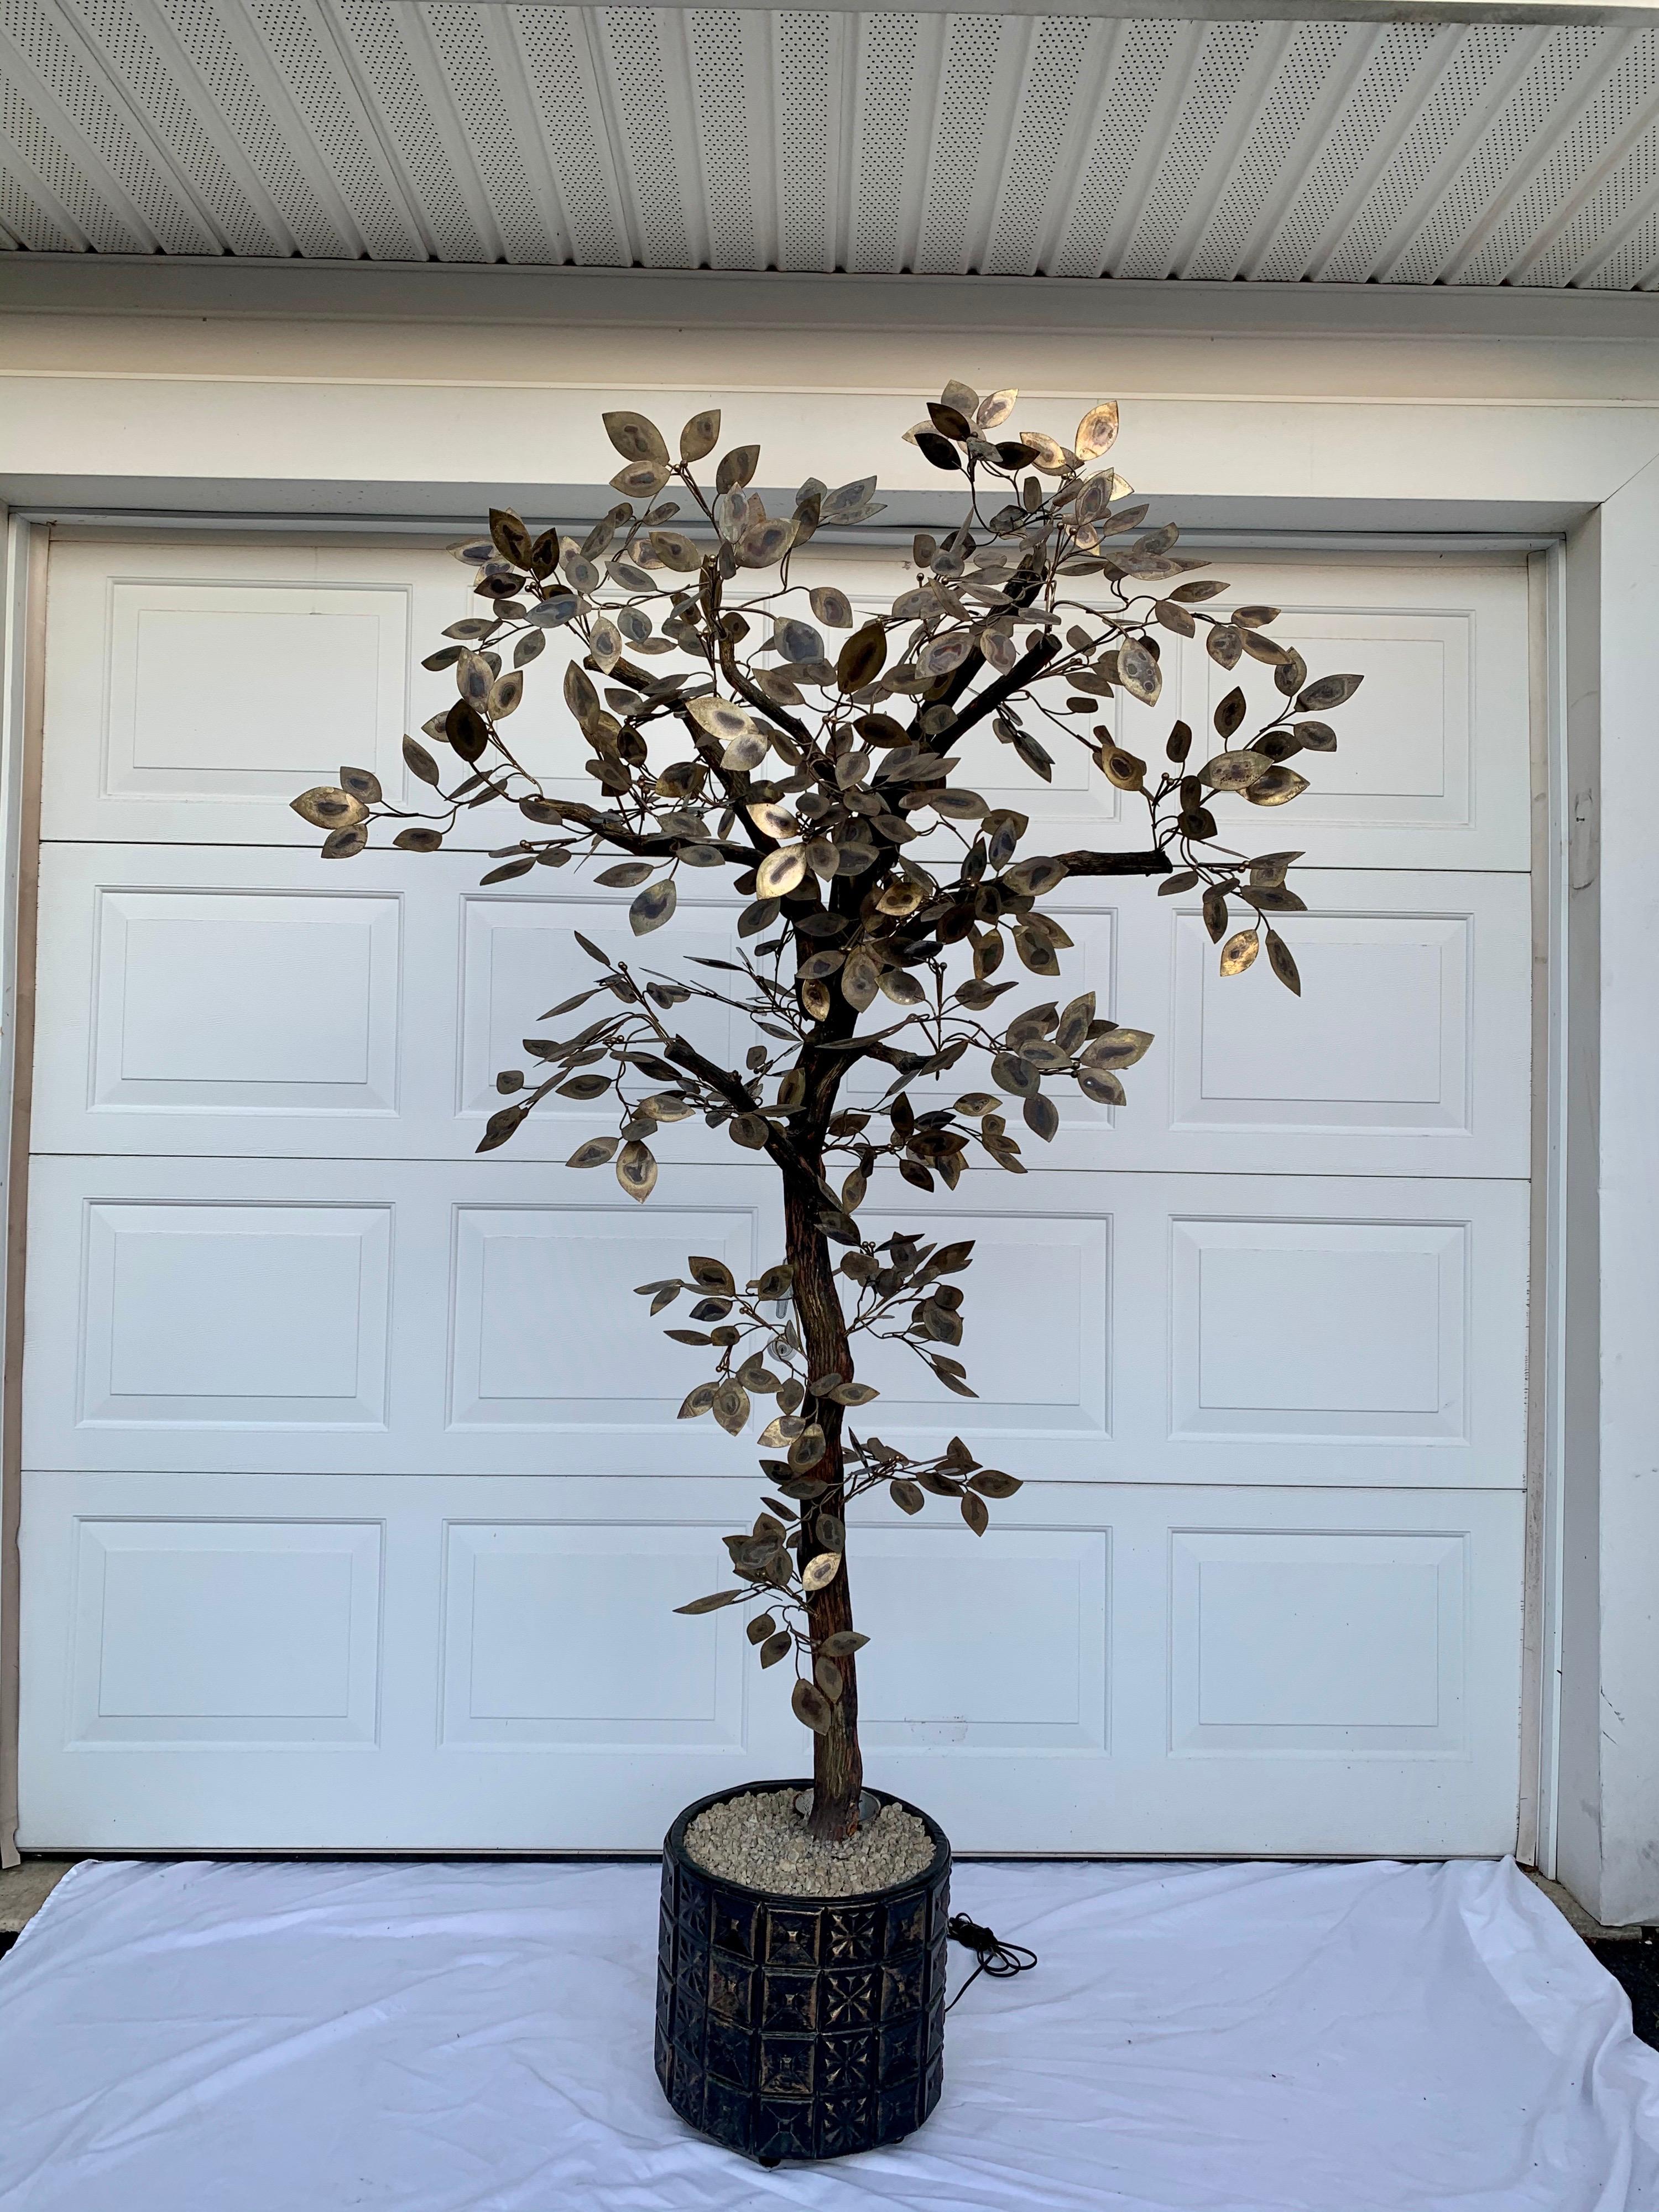 Mid-Century Modern metal tree sculpture by Curtis Jere. This tall dimensional botanic floor tree features torched gold brass metal leaves on natural wood stems and is anchored in a Brutalist planter. The planter has a built-in up light and natural